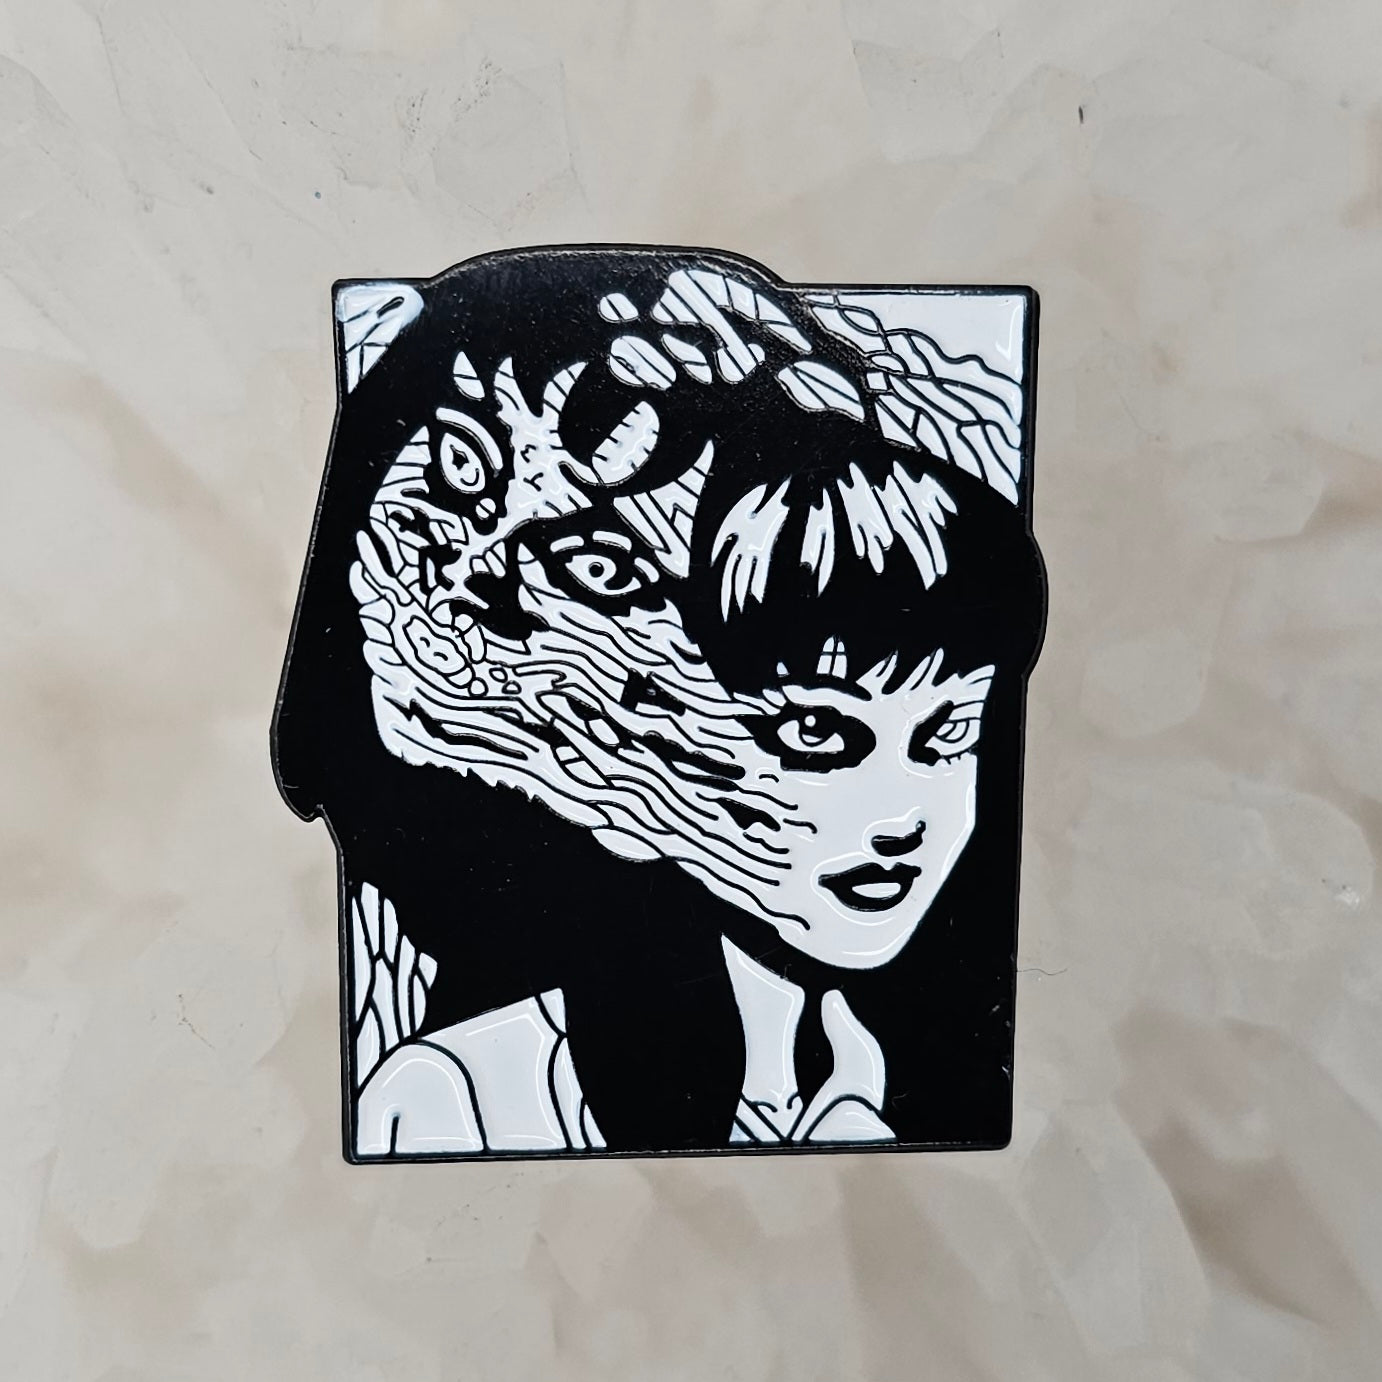 Wendy Possession Succubus Demon Horror Gore Slasher Scary Movie Enamel Pins Hat Pins Lapel Pin Brooch Badge Festival Pin